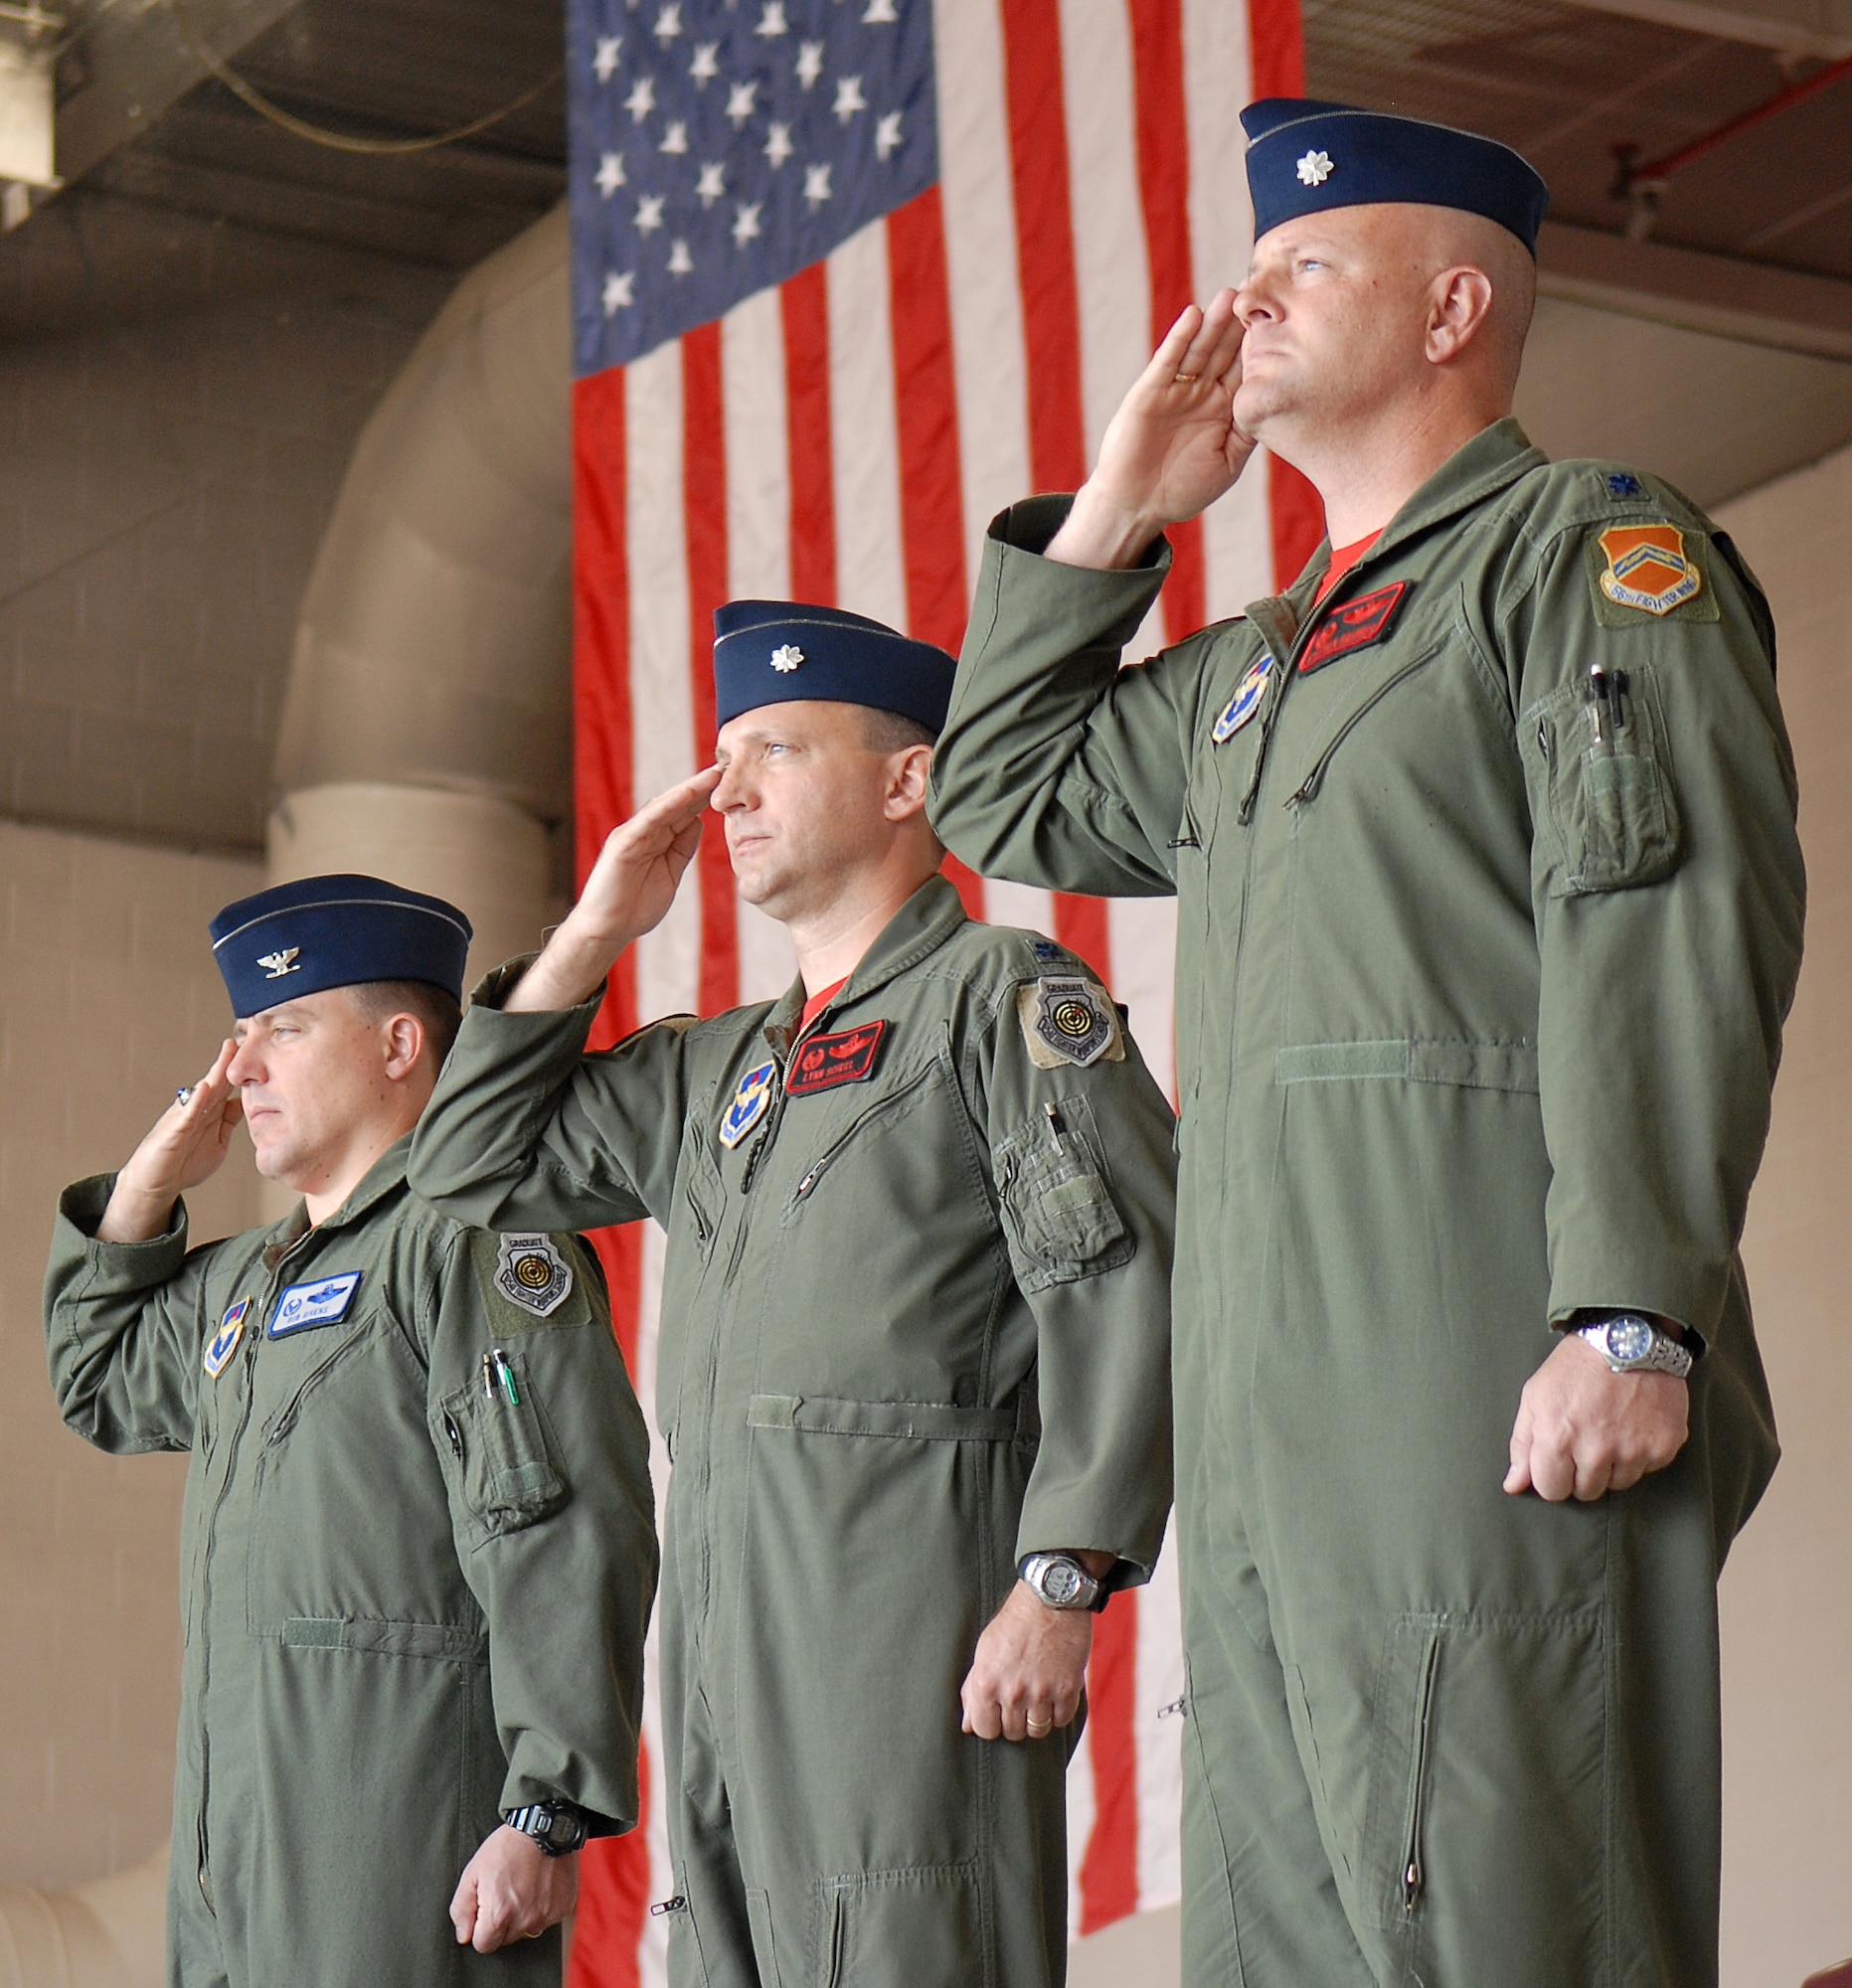 Col. Robert Givens, 56th Operations Group commander, officiated the 425th FS change of command ceremony where Lt. Col. Lynn Scheel relinquished command to Lt. Col. Stephen Granger April 25. (U.S. Air Force photo by SSgt. Jerry Fleshman) 